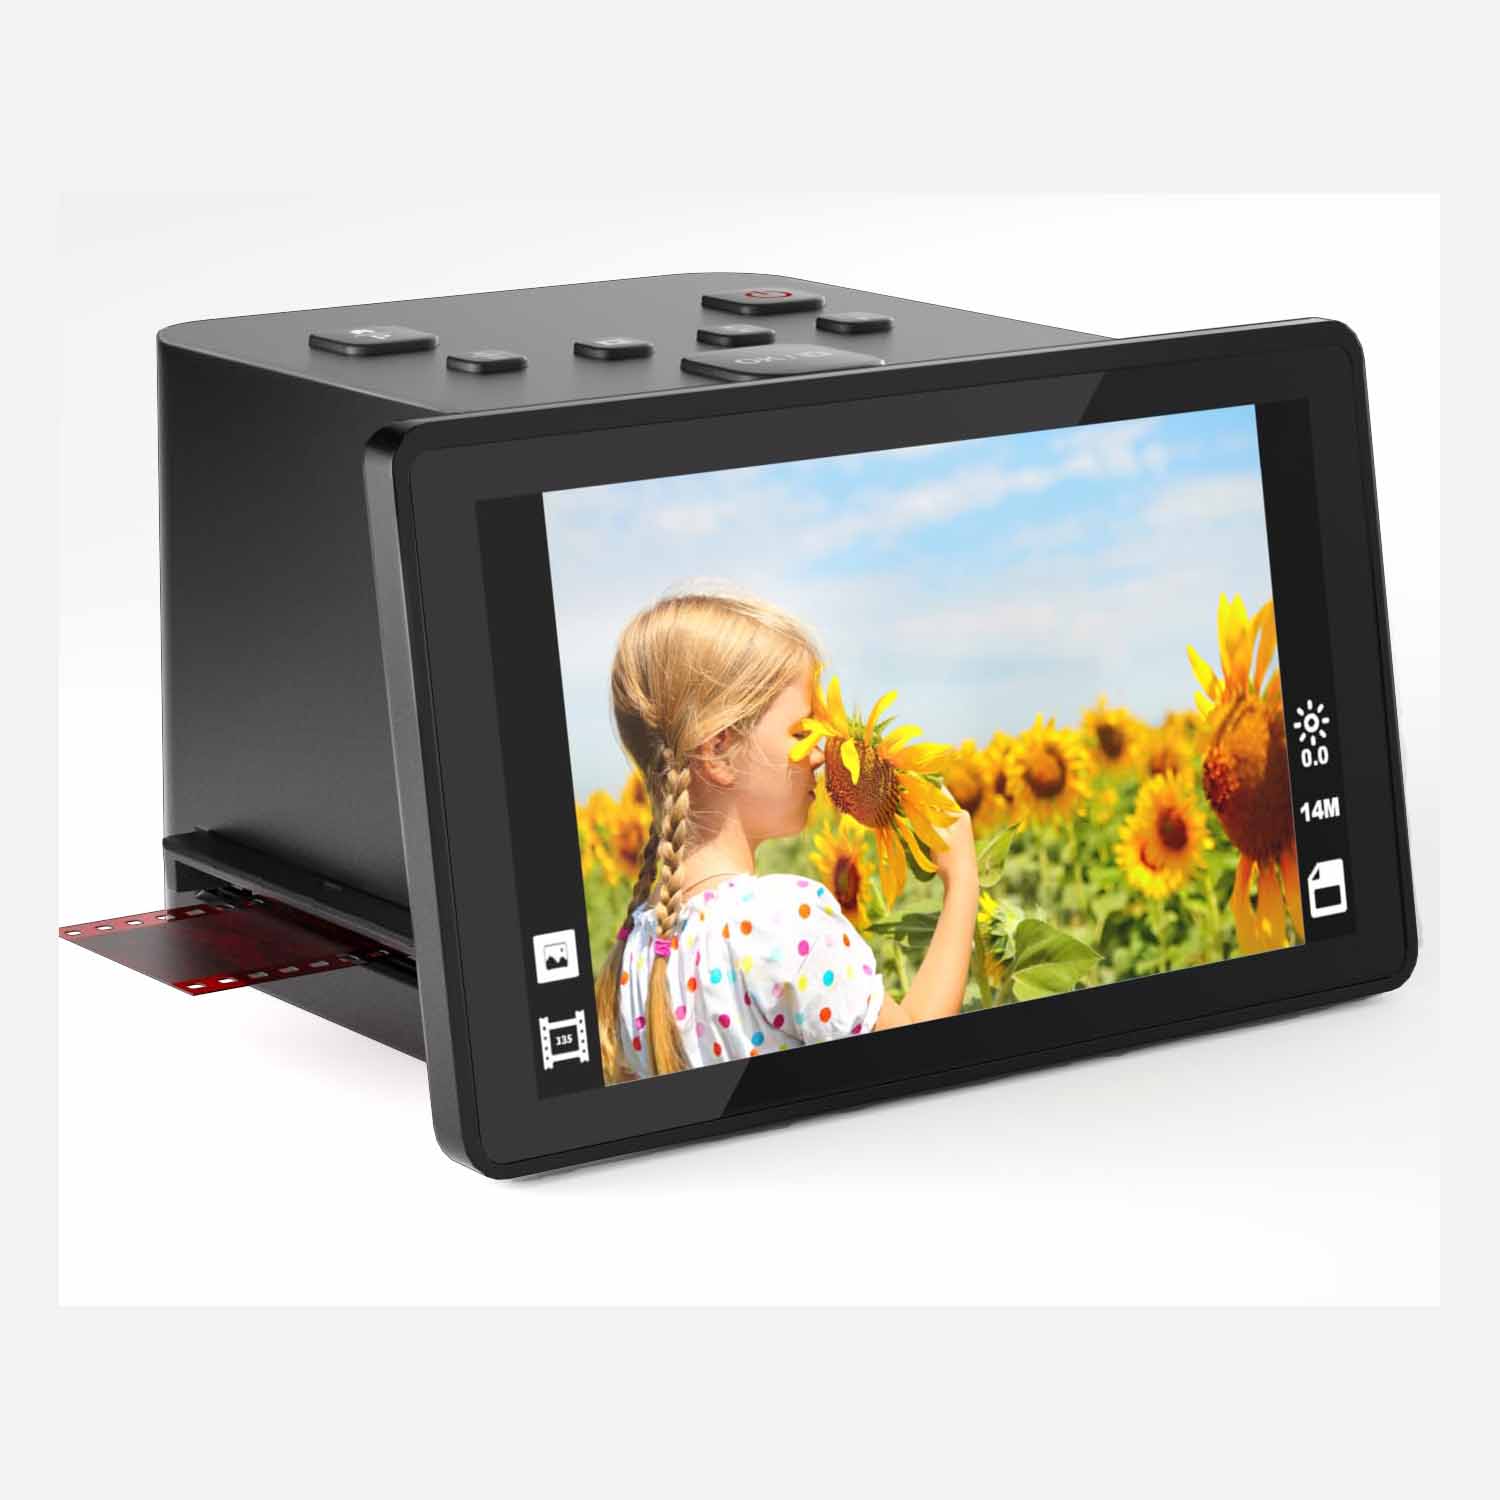 35mm Film Scanner & Slide Viewer with a Large 5” LCD Screen That converts Scanned Color & B&W Negatives 110,135,126 & Super 8 Slides into high-Resolution 22MP JPEG Digital Photos